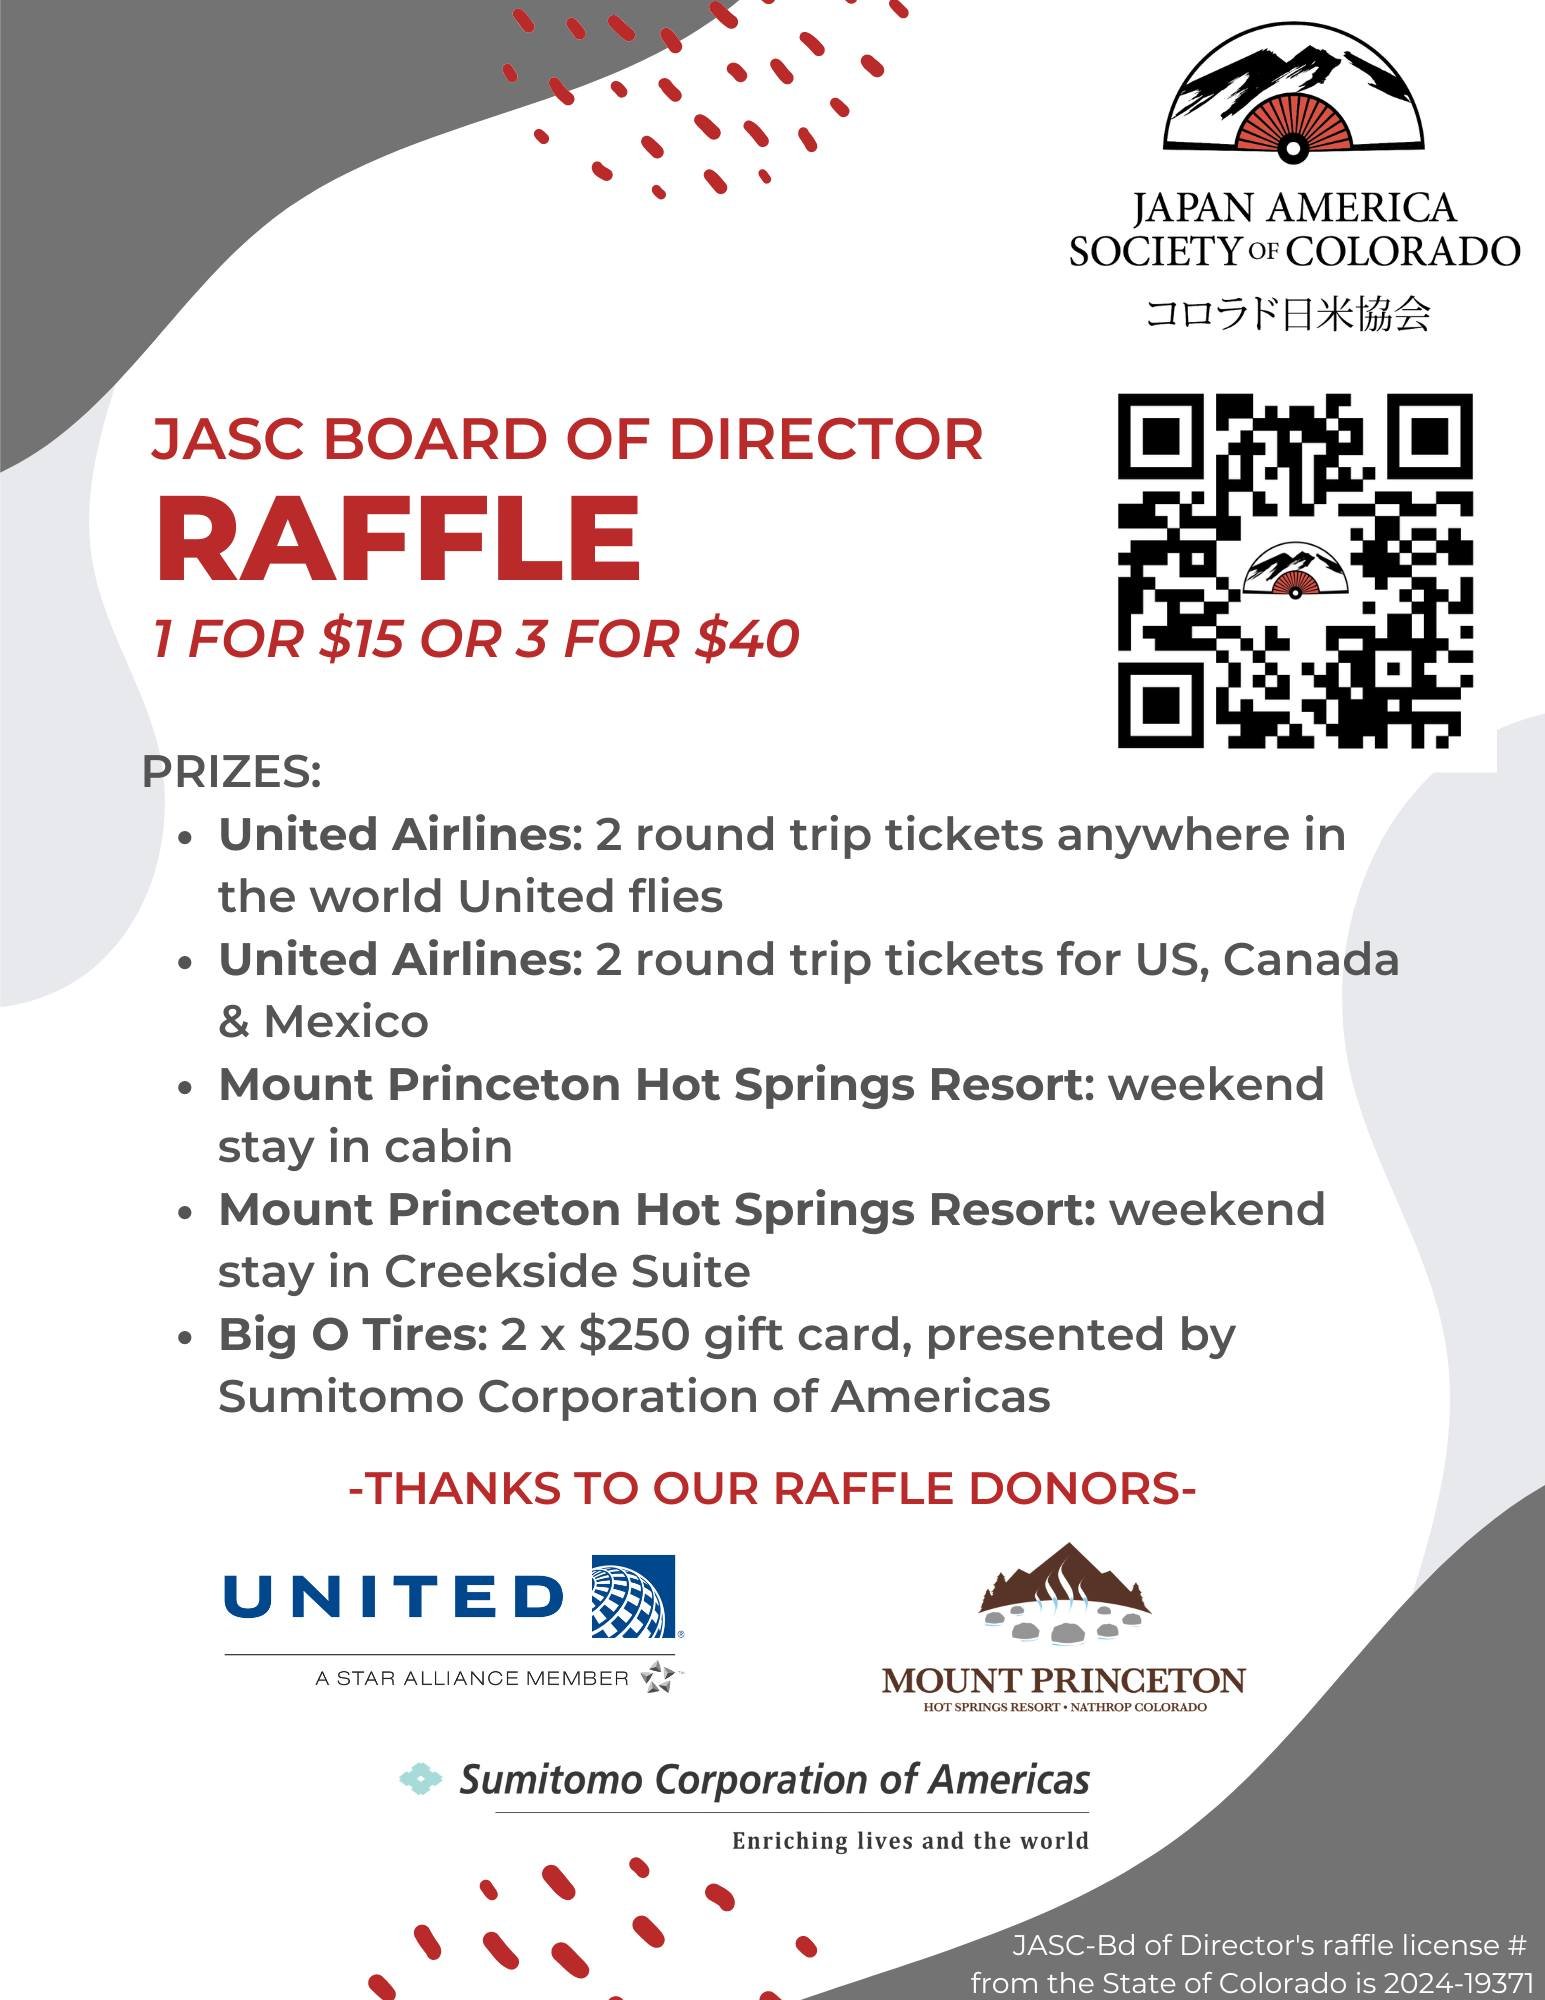 Our incredible annual RAFFLE is now live!! 🥳

You can purchase tickets from any of our Board members in person or using our online link. Grand prize is 2 tickets on United Airlines to...anywhere in the world that United flies! Tickets are 1 for $15 